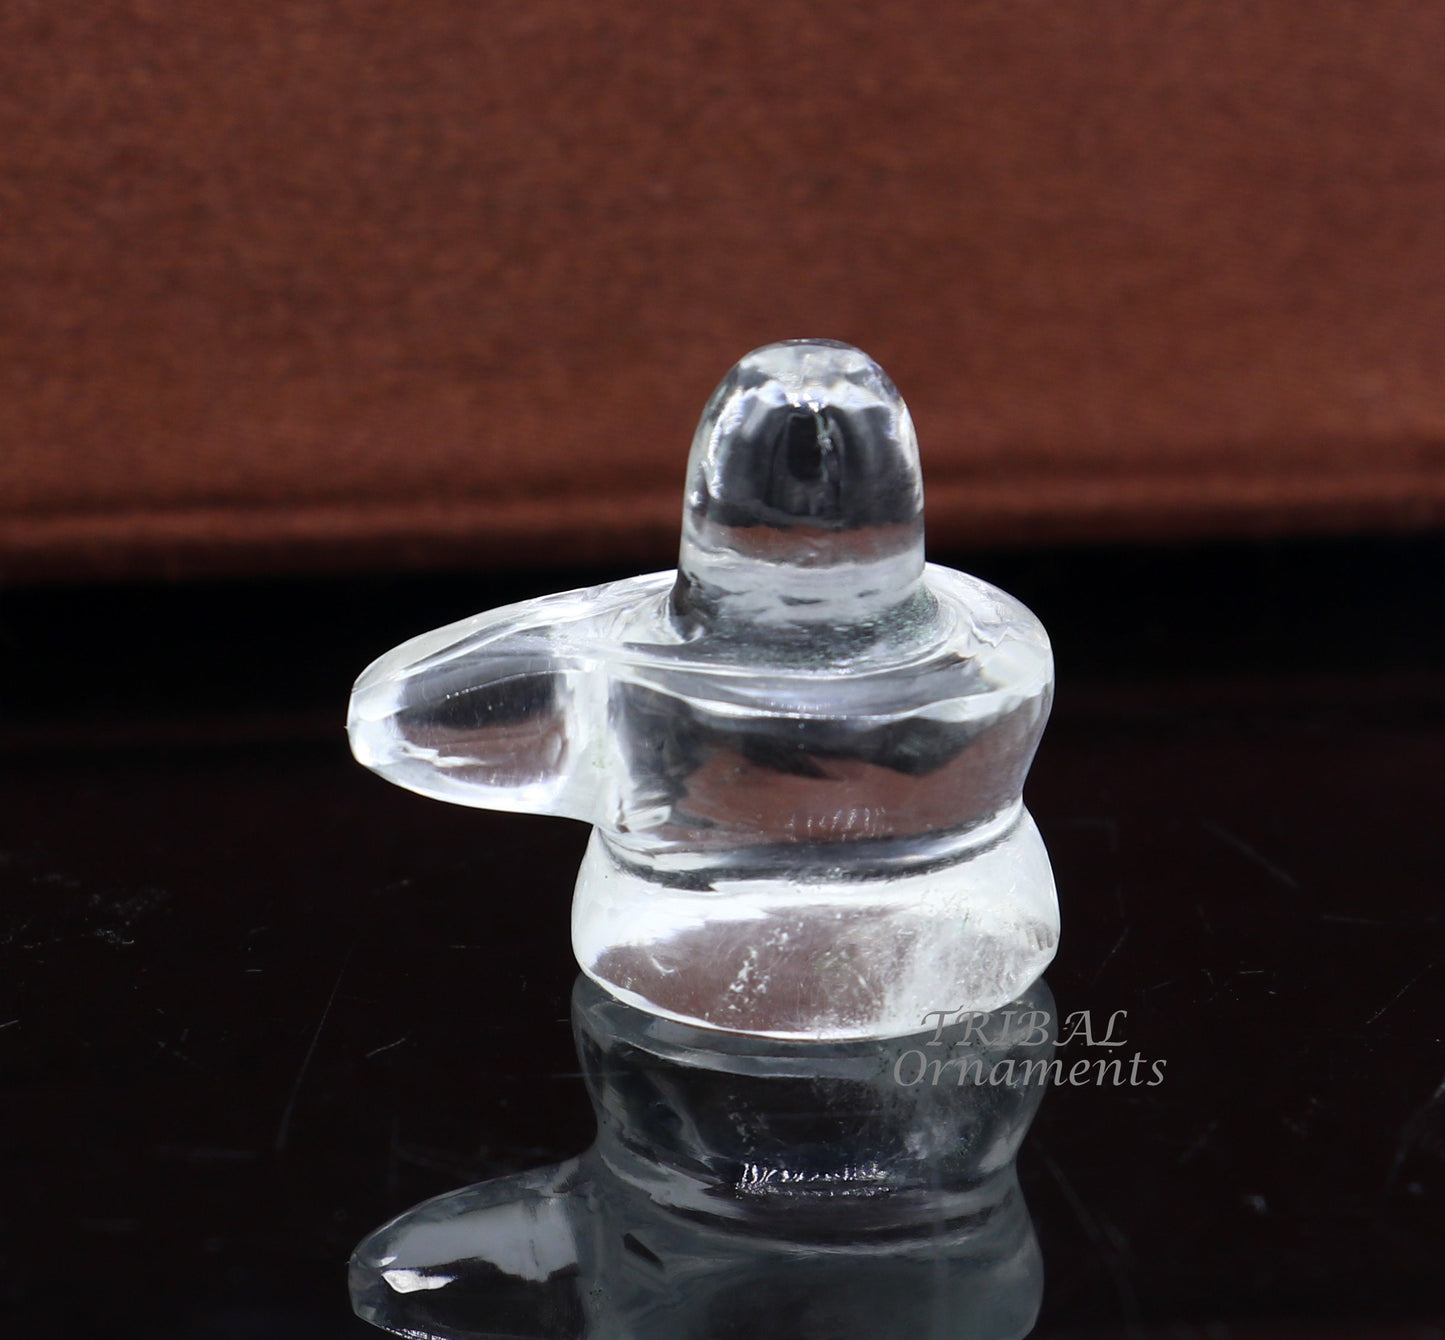 Amazing Natural sphatik crystal stone divine lor shiva lingam statue, amazing sphatik lingam puja article for wealth and prosperity stna21 - TRIBAL ORNAMENTS